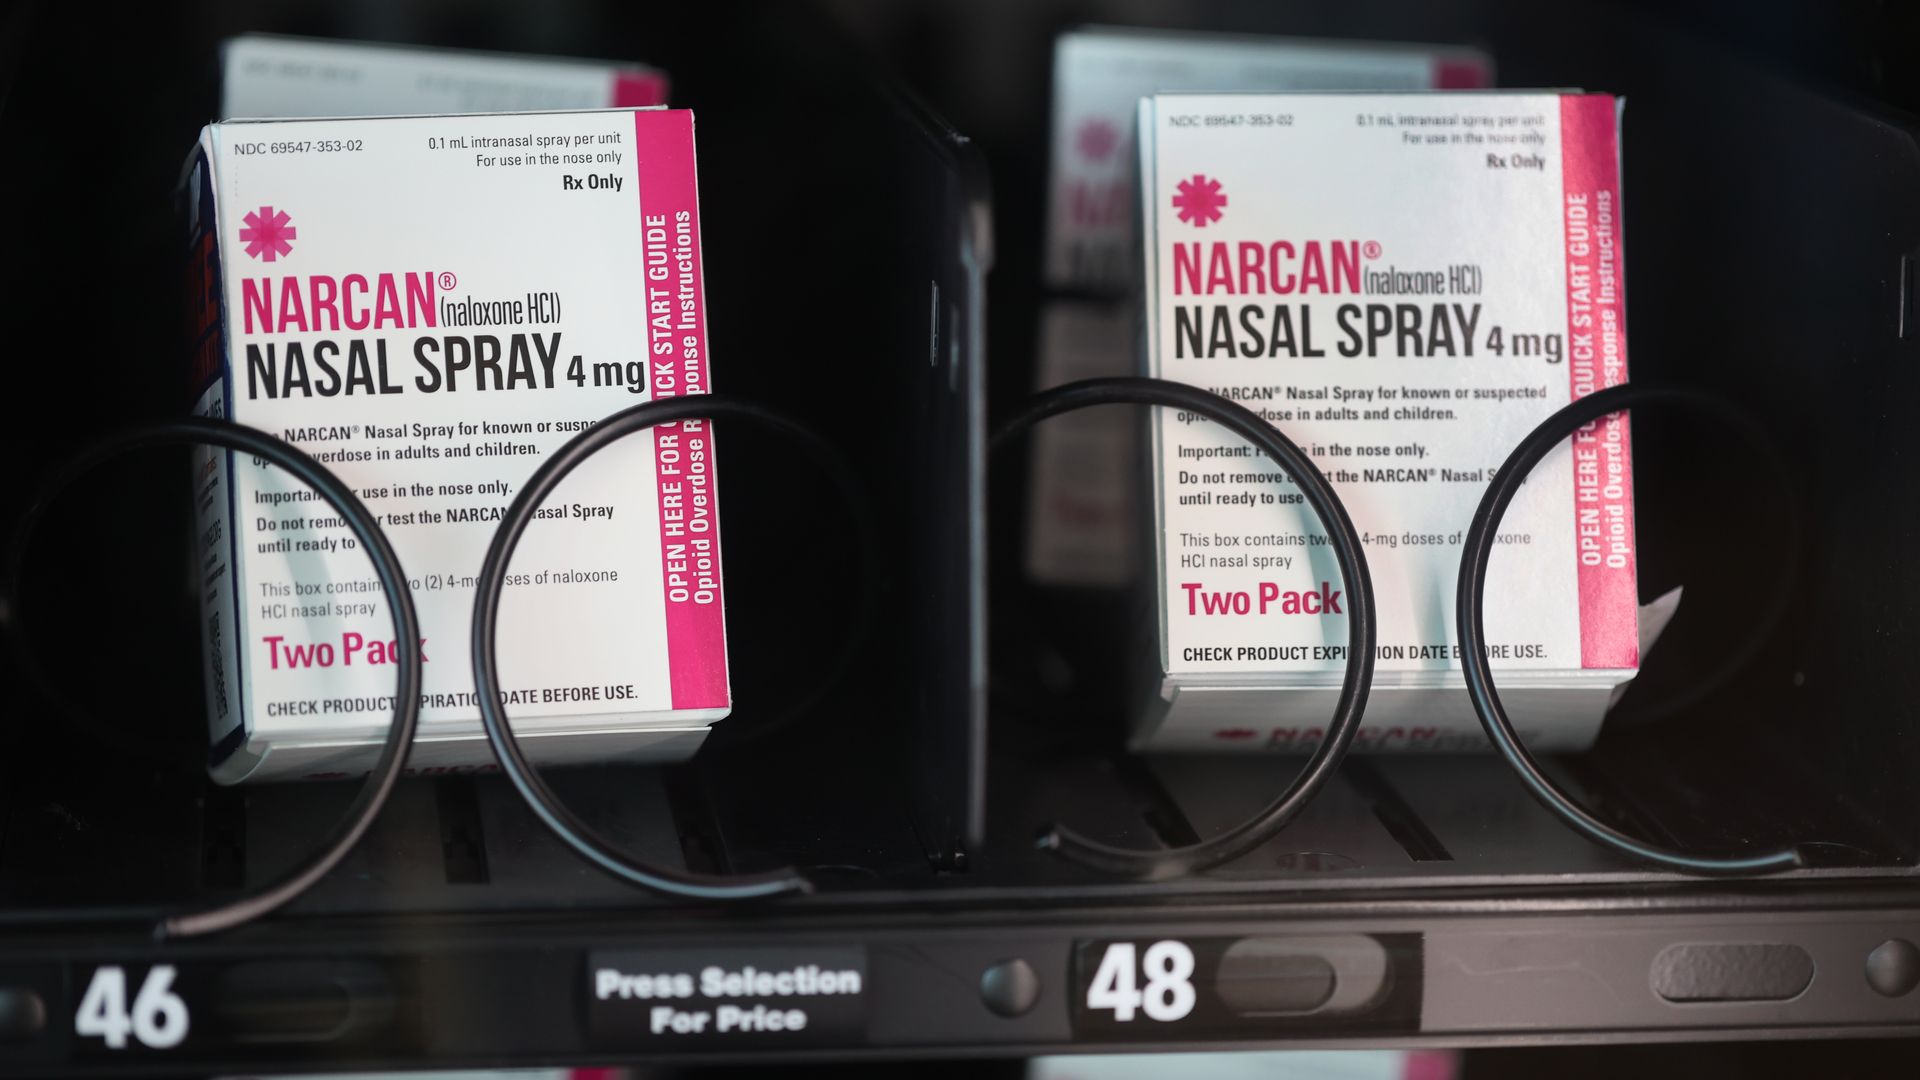 Two pink and white boxes of Narcan nasal spray next to each other in a vending machine